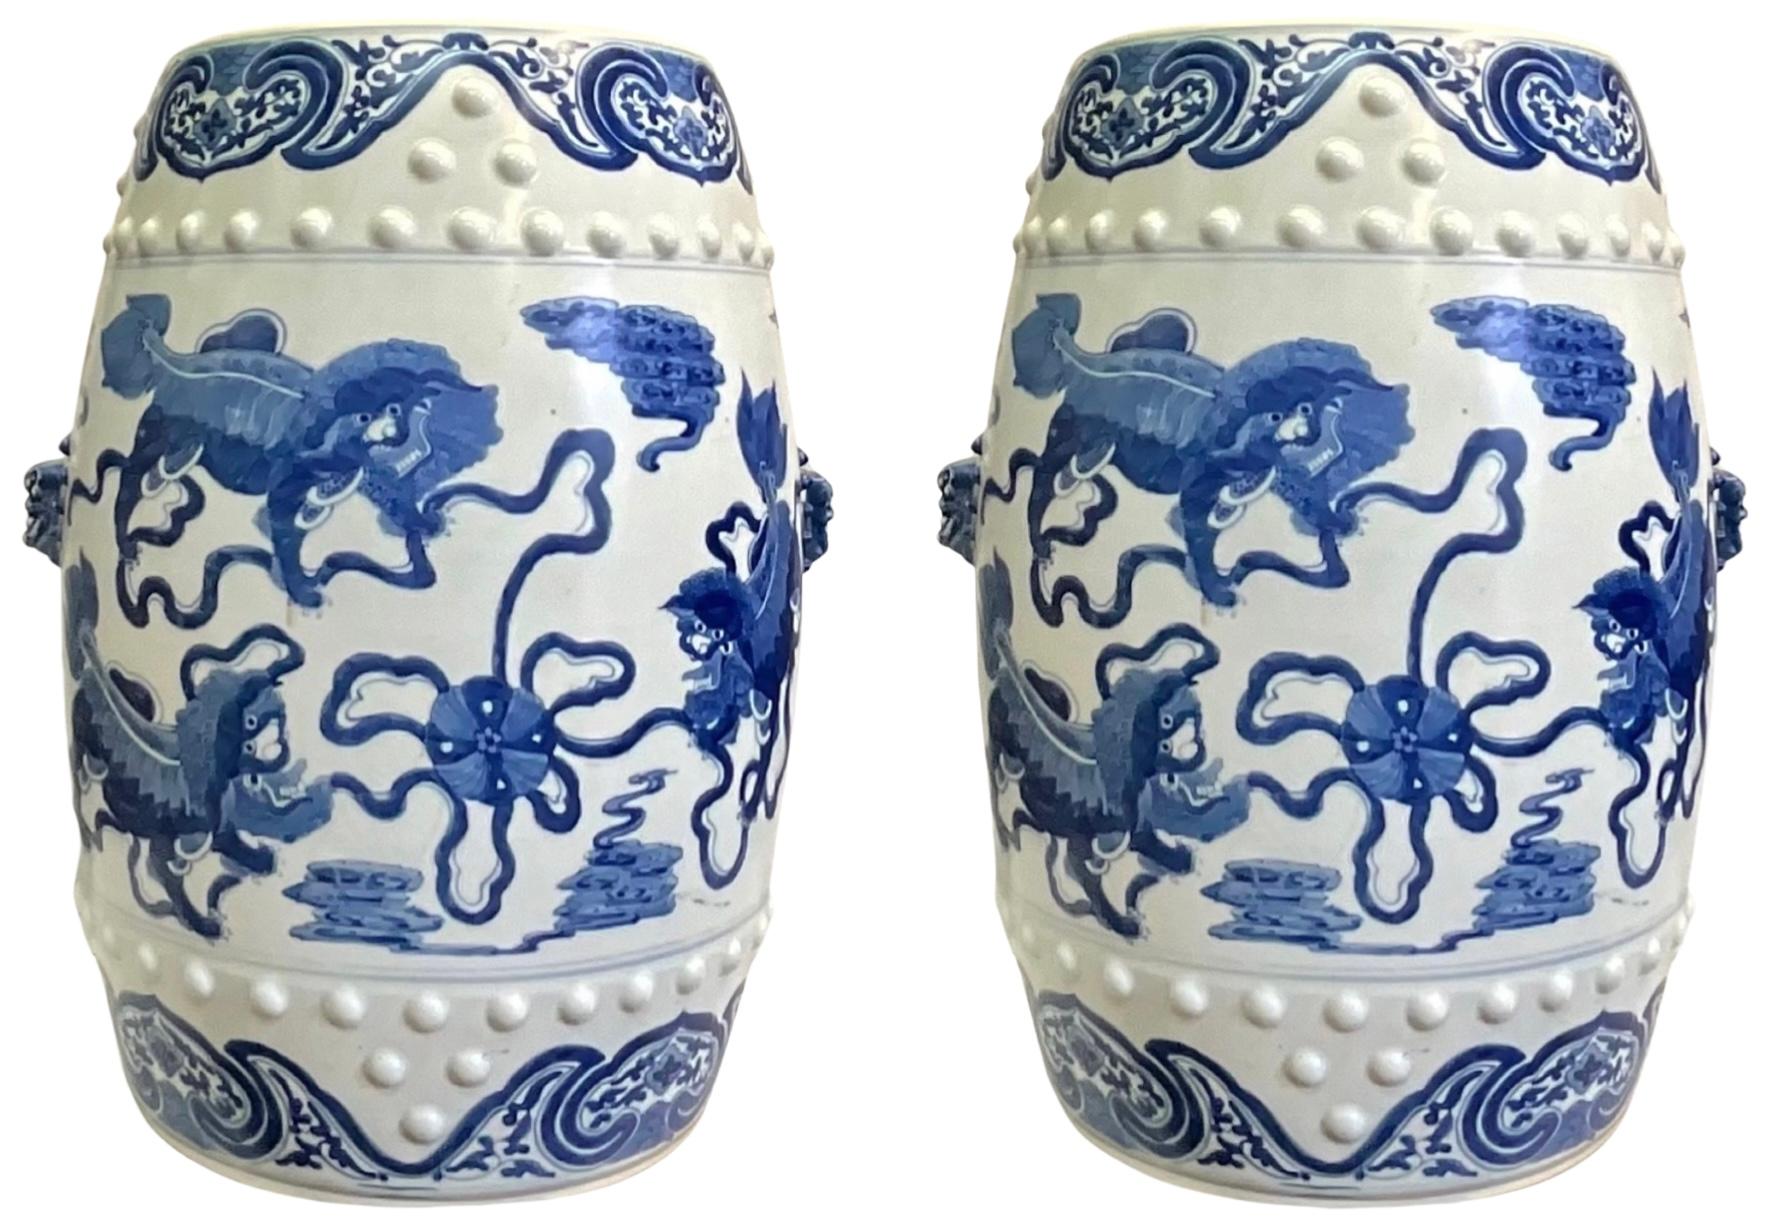 Chinese Export Style Blue and White Ceramic Foo Lion Garden Stools / Tables - 2 For Sale 3